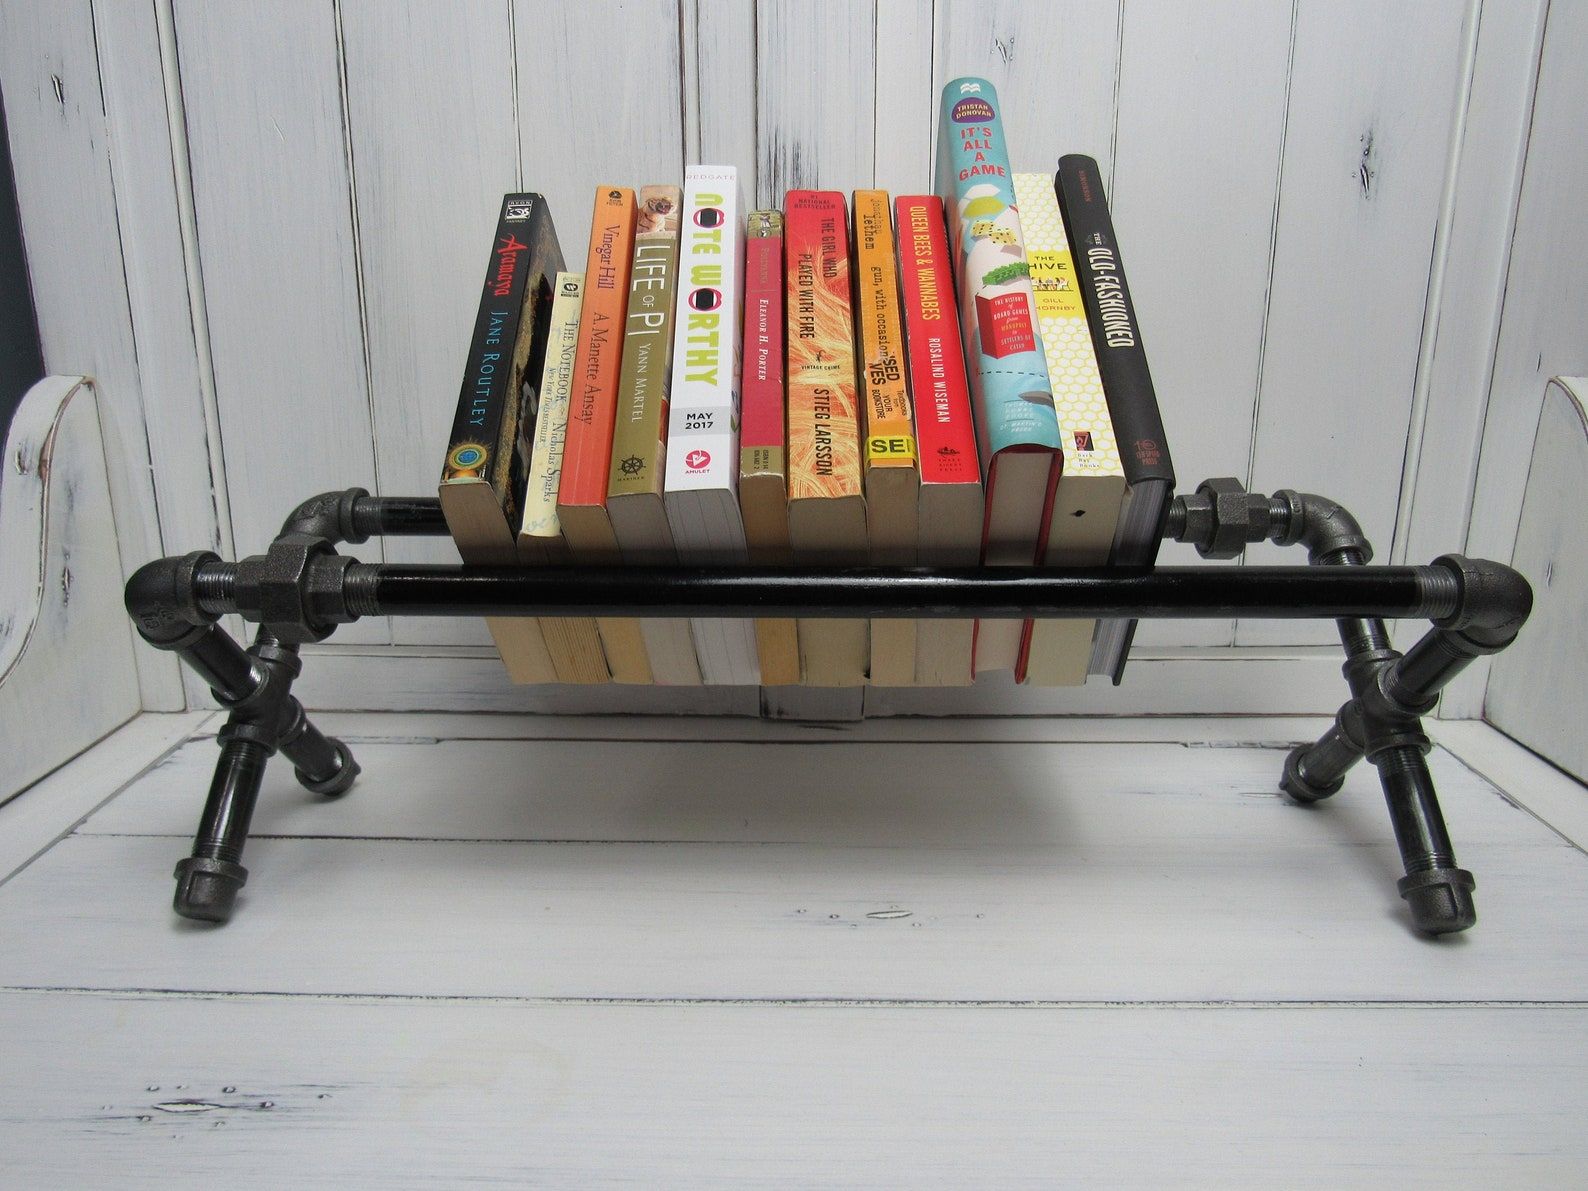 steel pipe book rack with books shelved in the center